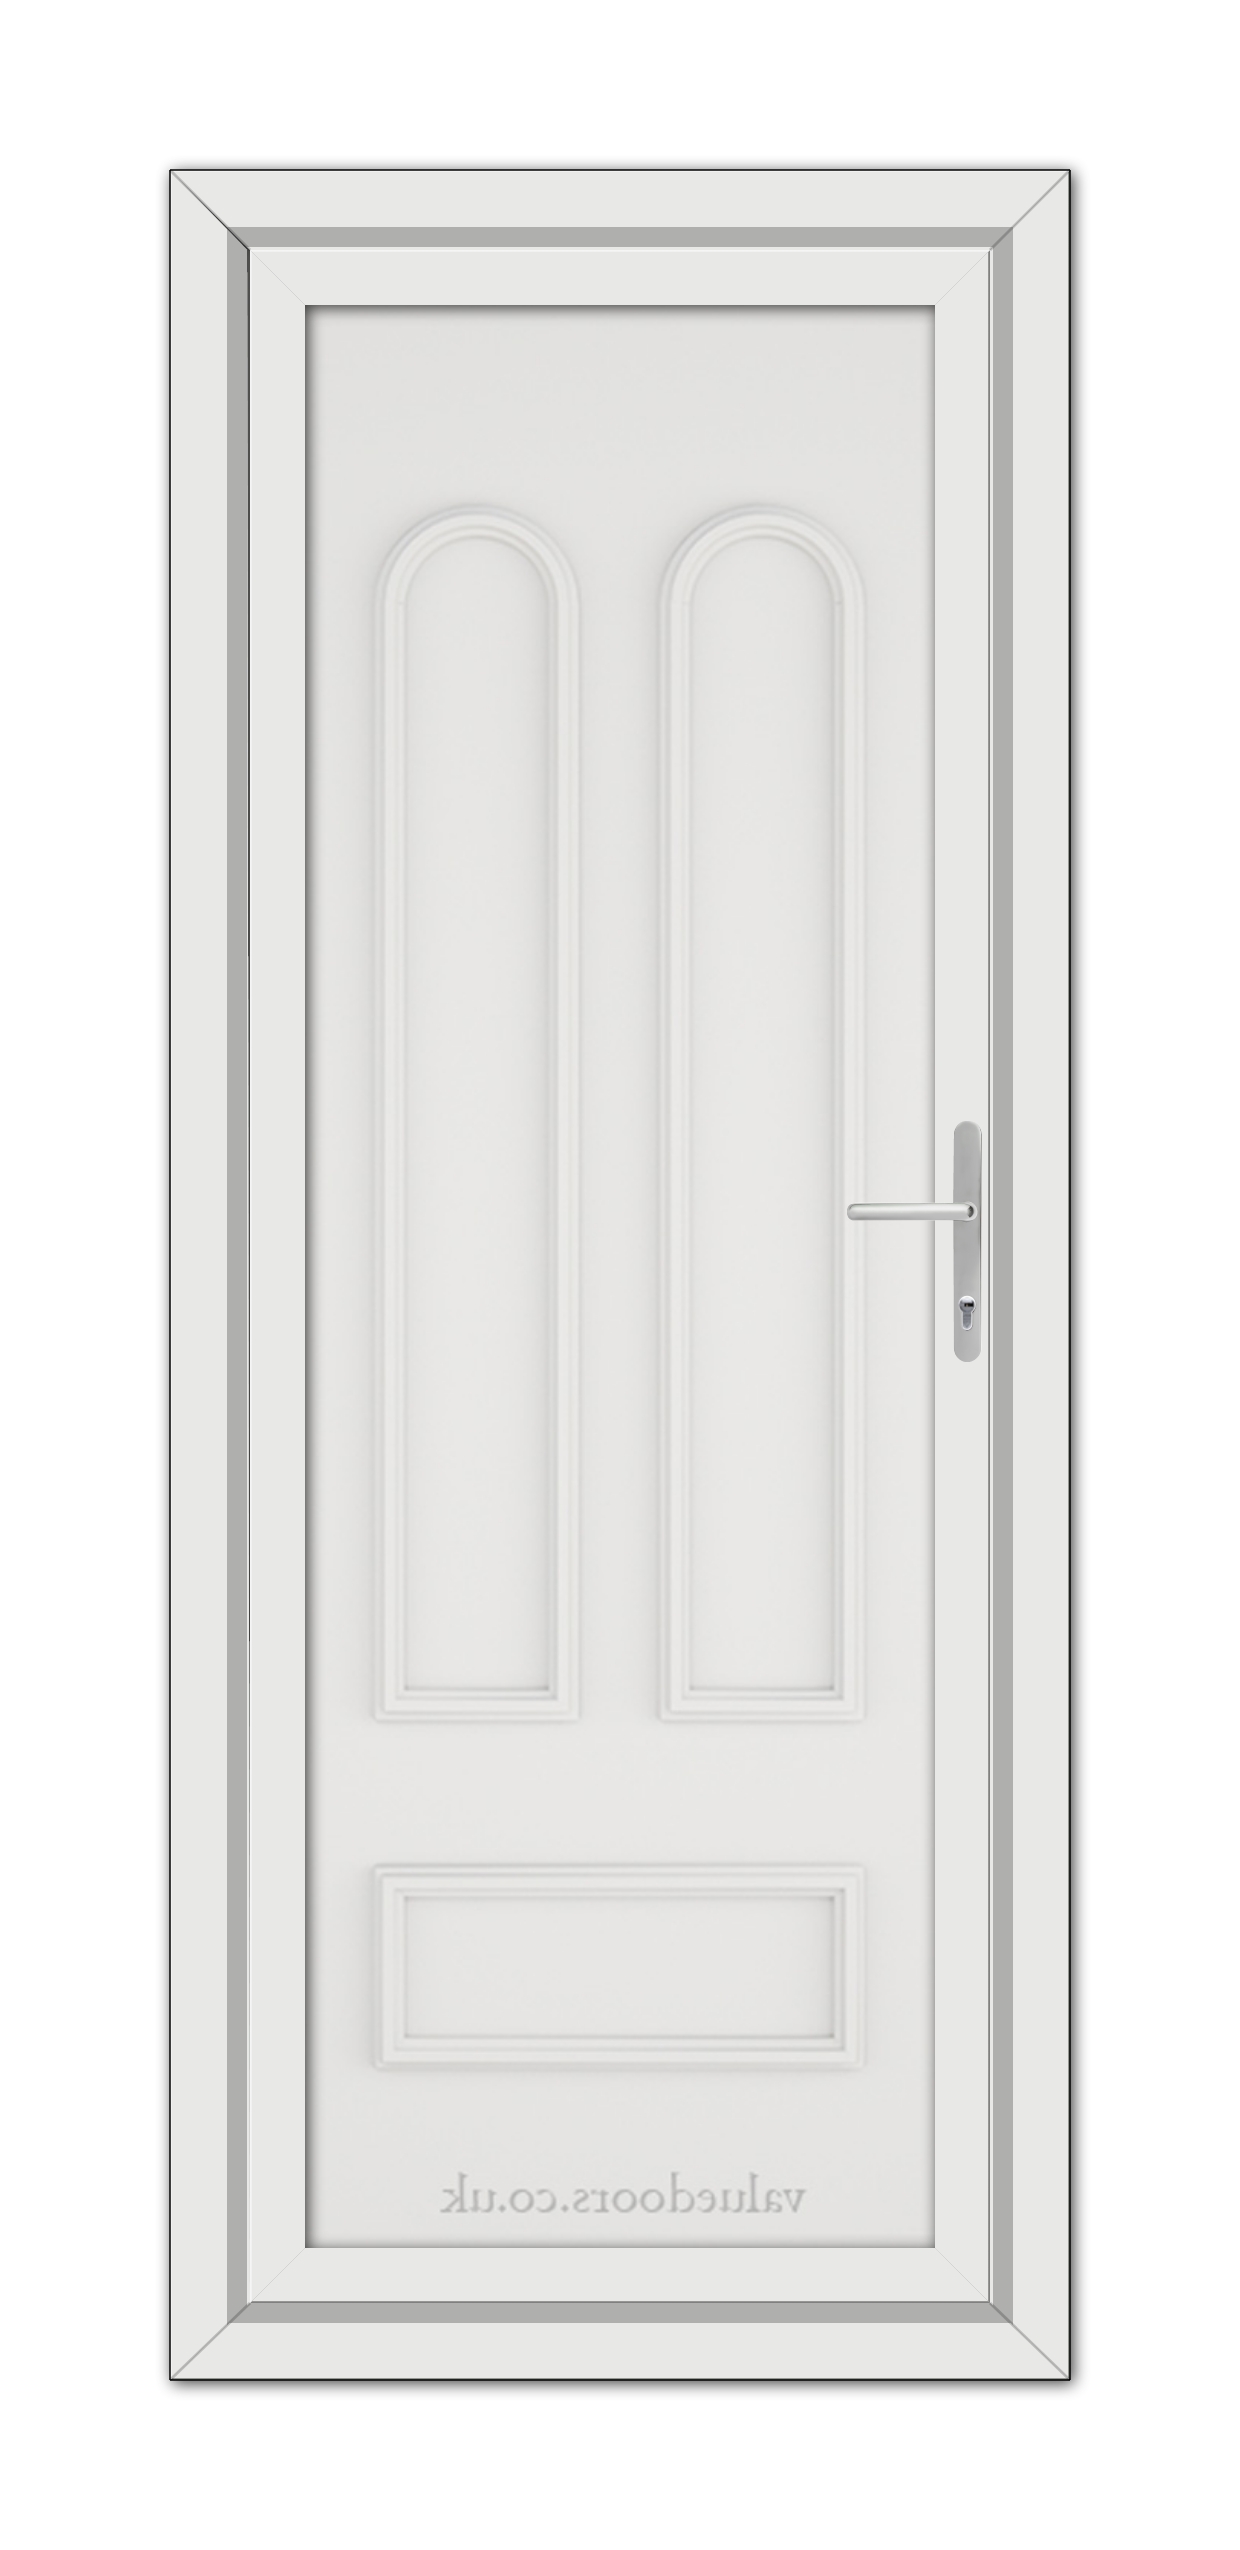 A vertical image of a closed White Madrid Solid uPVC Door with two elongated panels and a metallic handle, set within a simple frame.